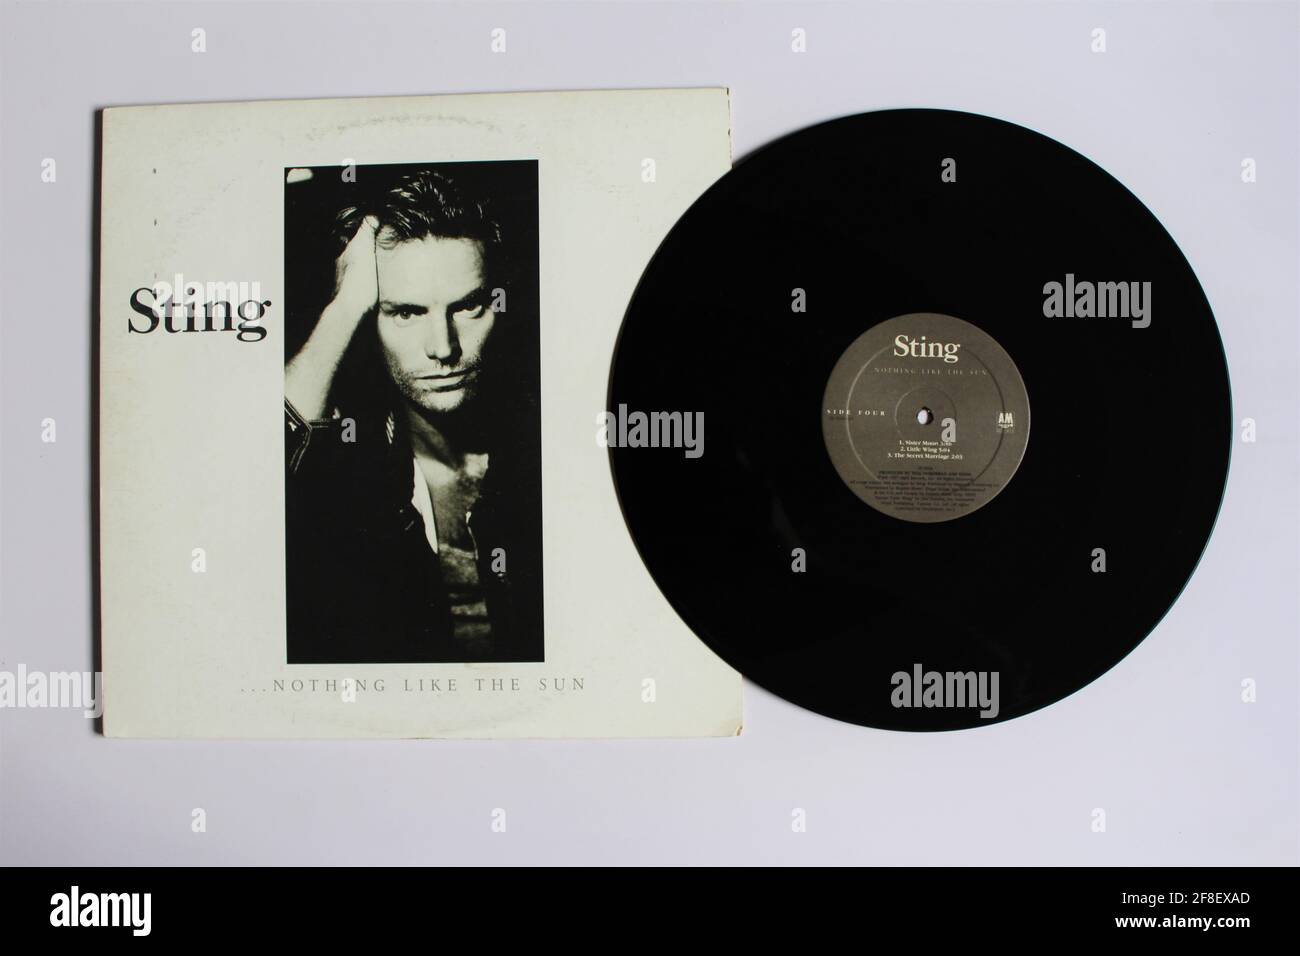 Pop soft rock, jazz and reggae band, Sting music album on vinyl record LP disc. Titled: Nothing Like the Sun Stock Photo